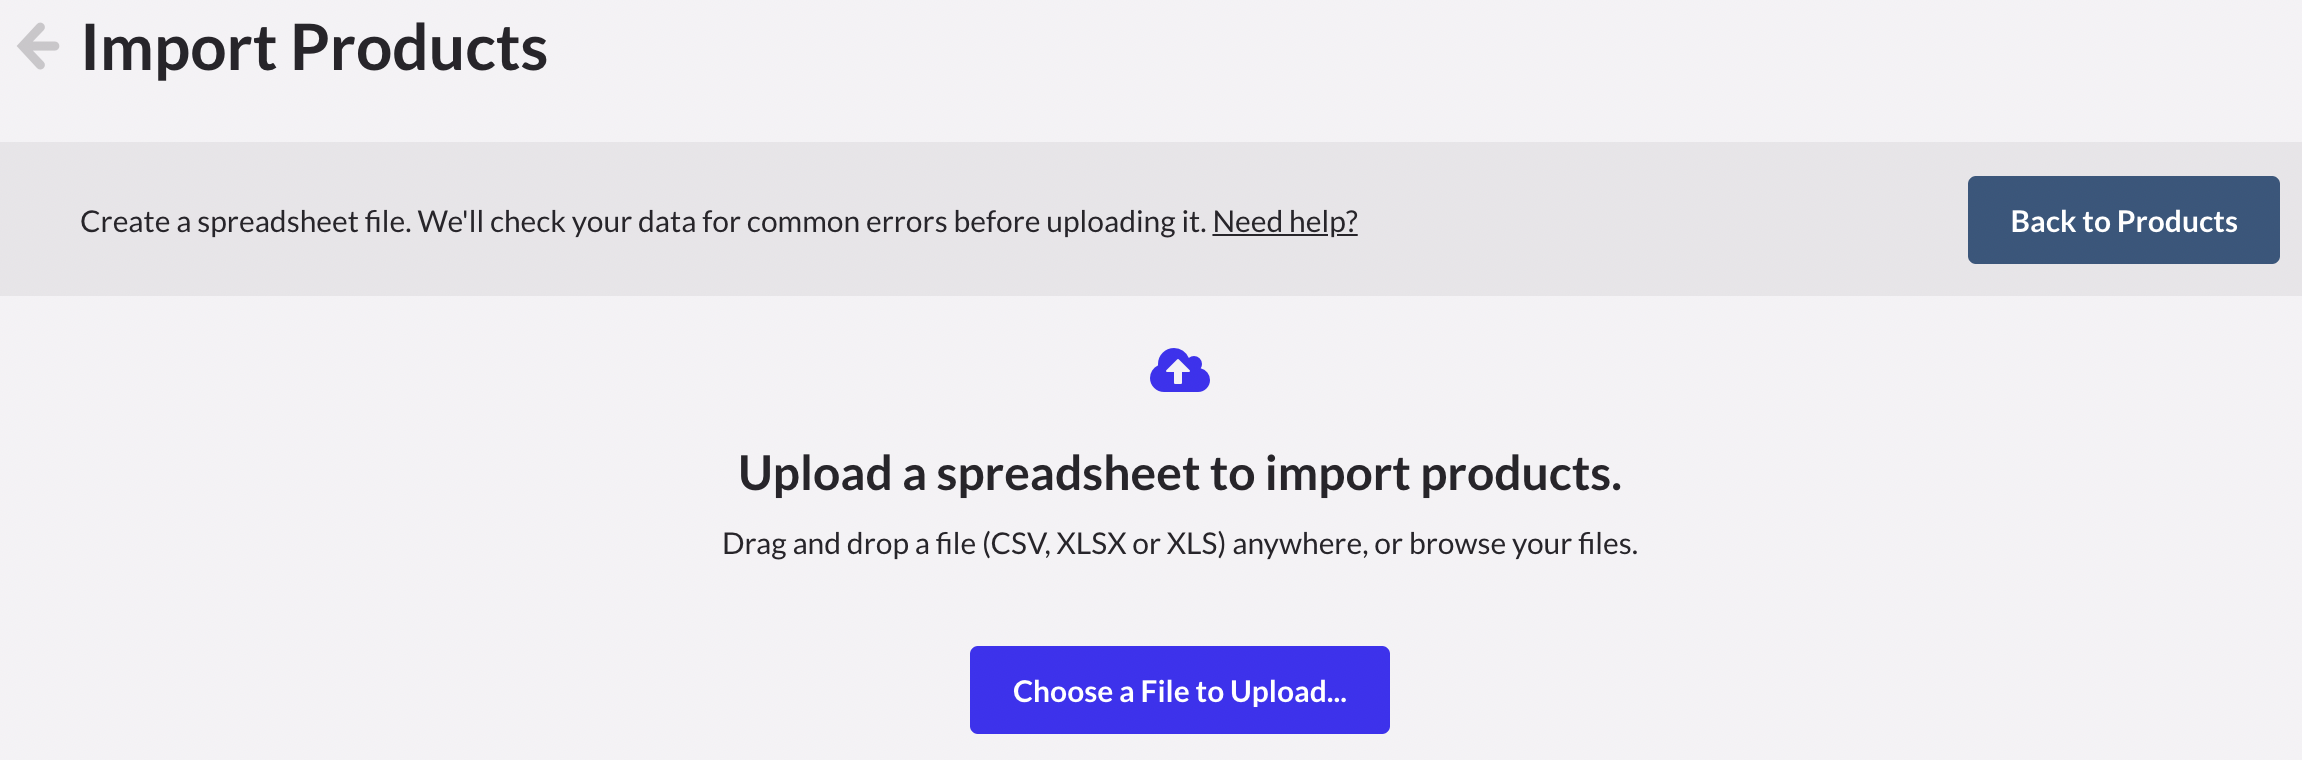 Import Products page showing the Upload a spreadsheet to import products uploading area and button.